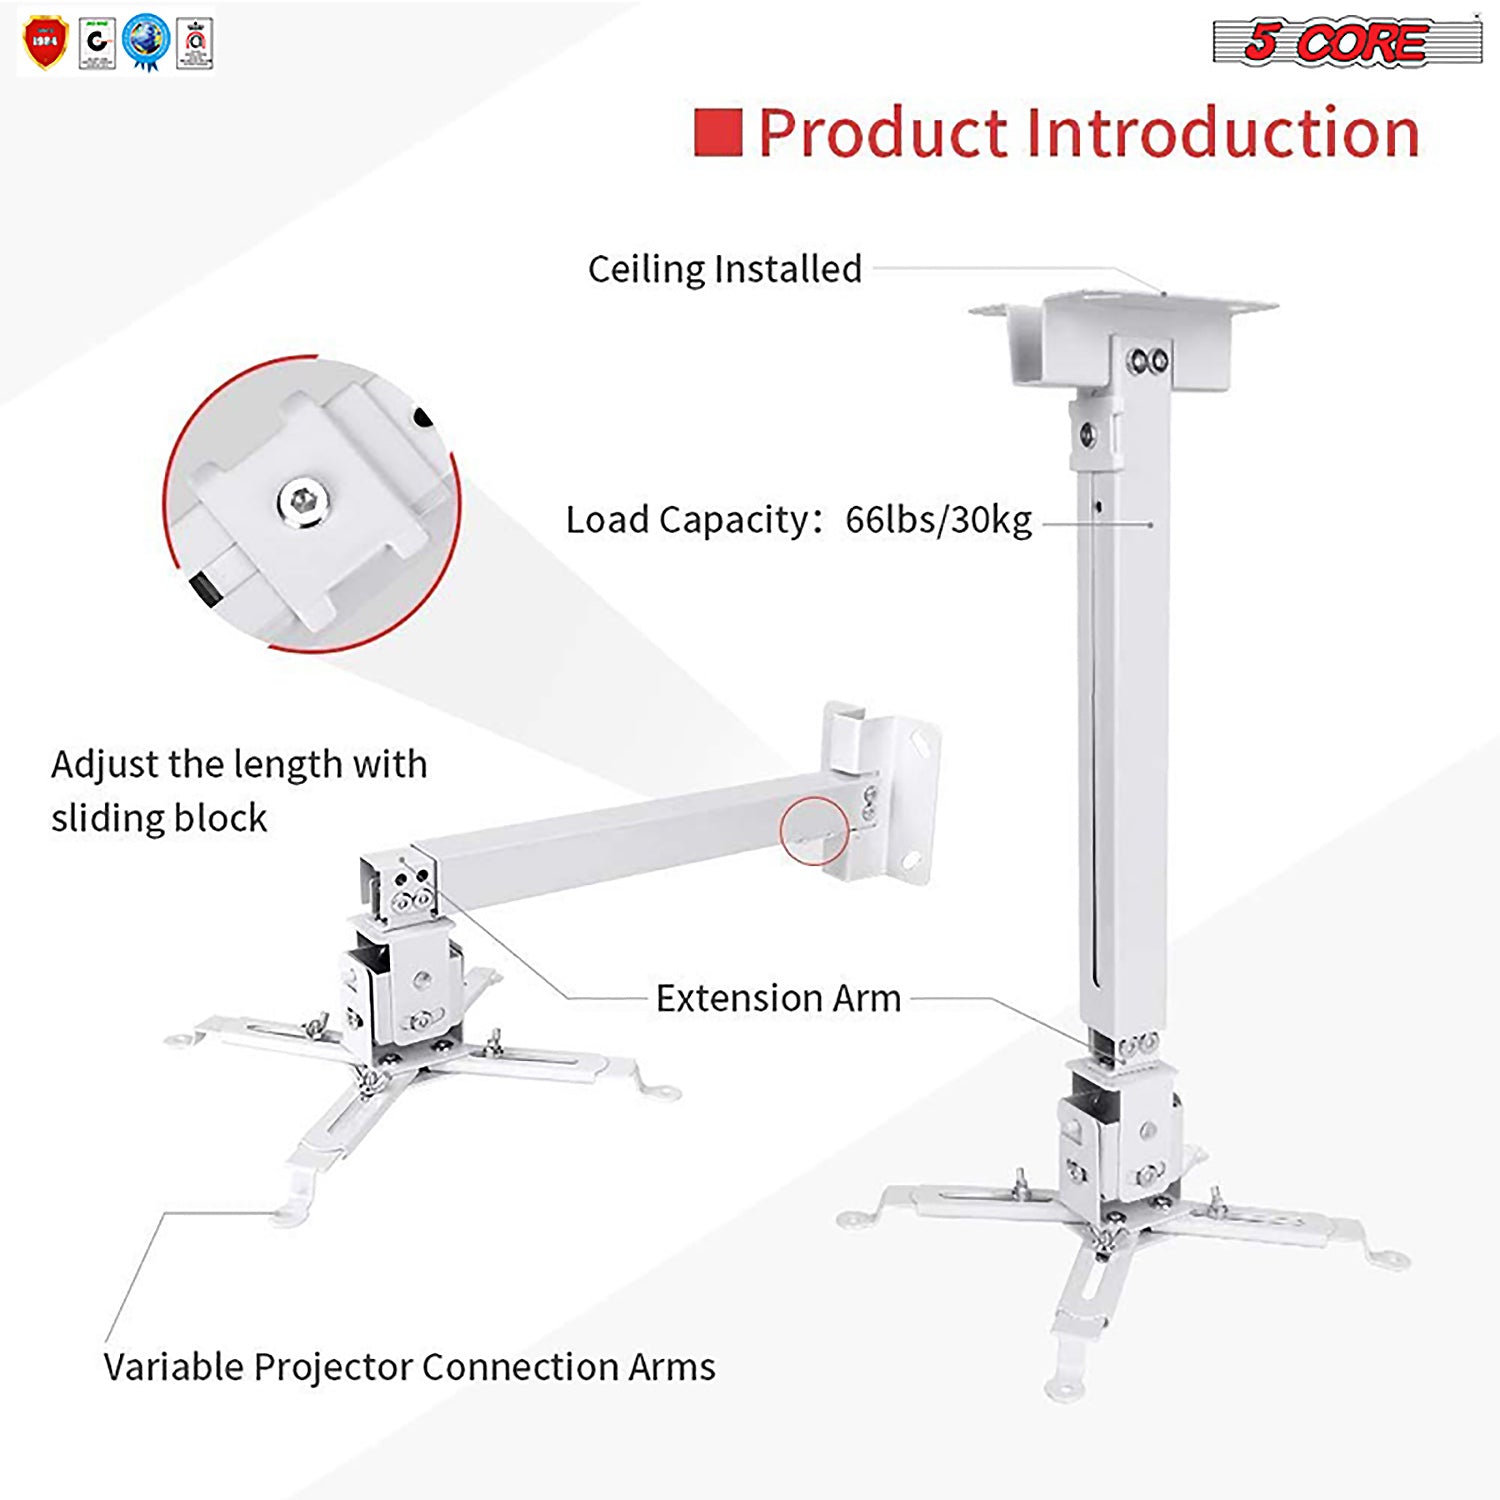 5Core Projector Ceiling Wall Mount Adjustable Low Profile Universal Projector Holder Capacity 40lb